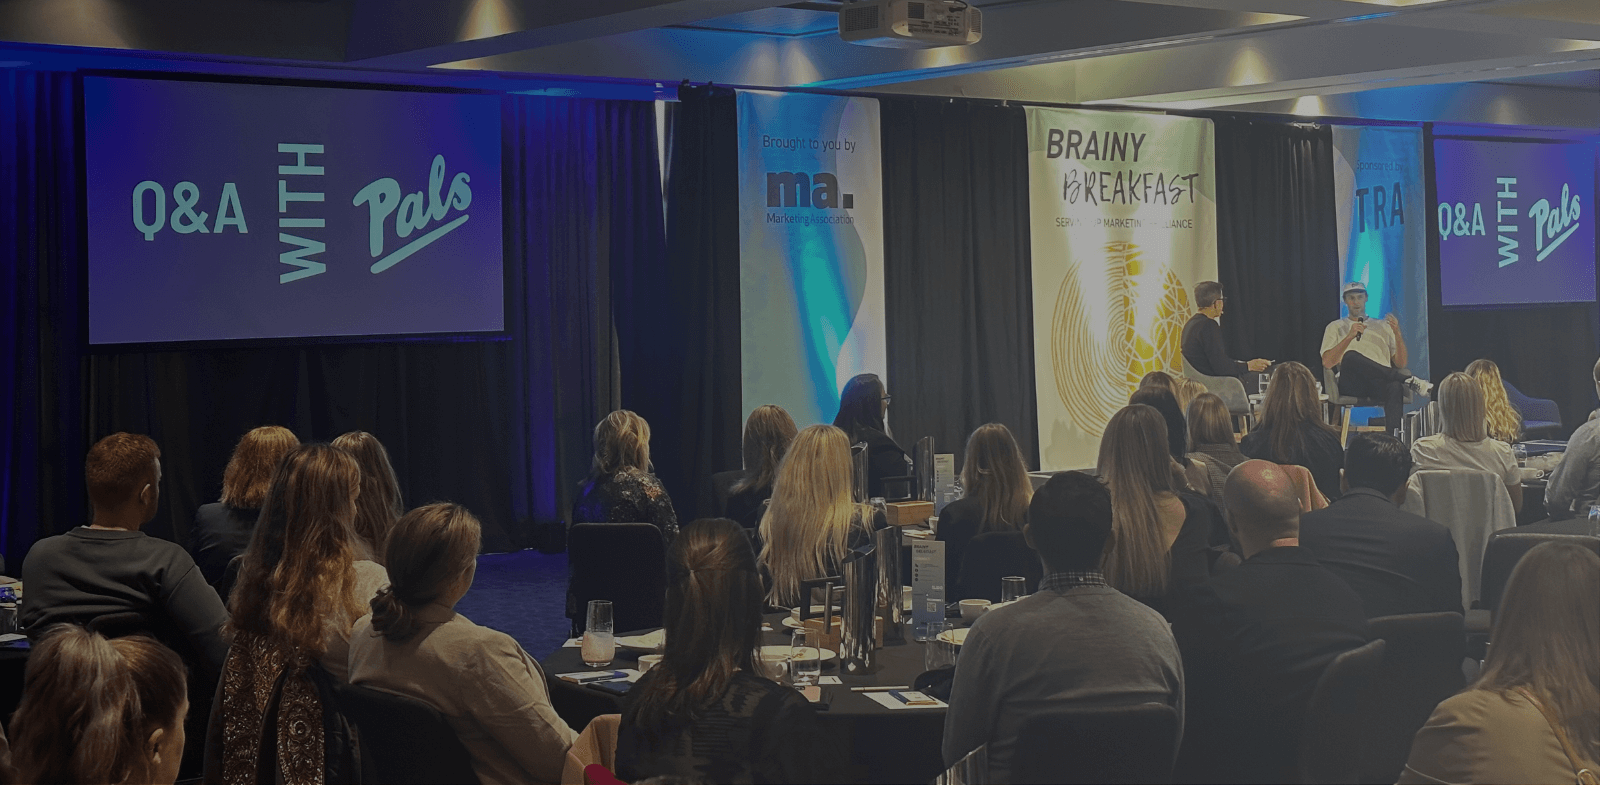 Brainy Breakfast recap: A Q&A with Pals Co-Founder, Mat Croad